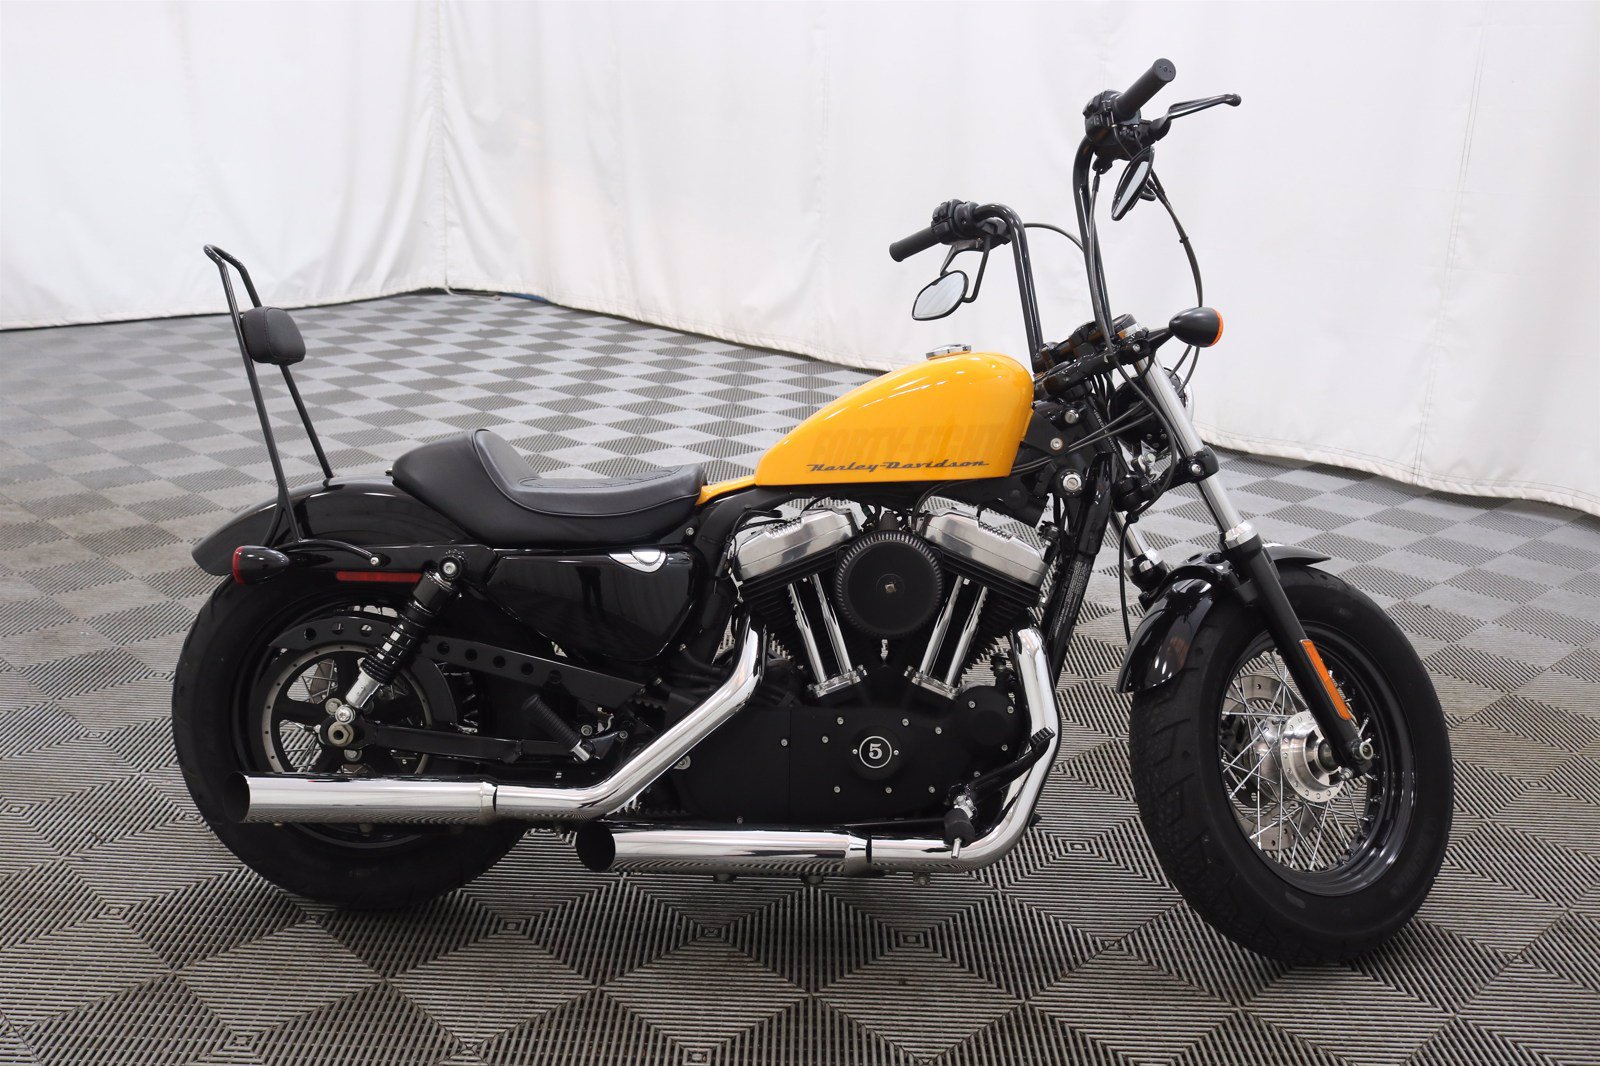 Pre-Owned 2012 HARLEY DAVIDSON XL1200 Forty-Eight in ...